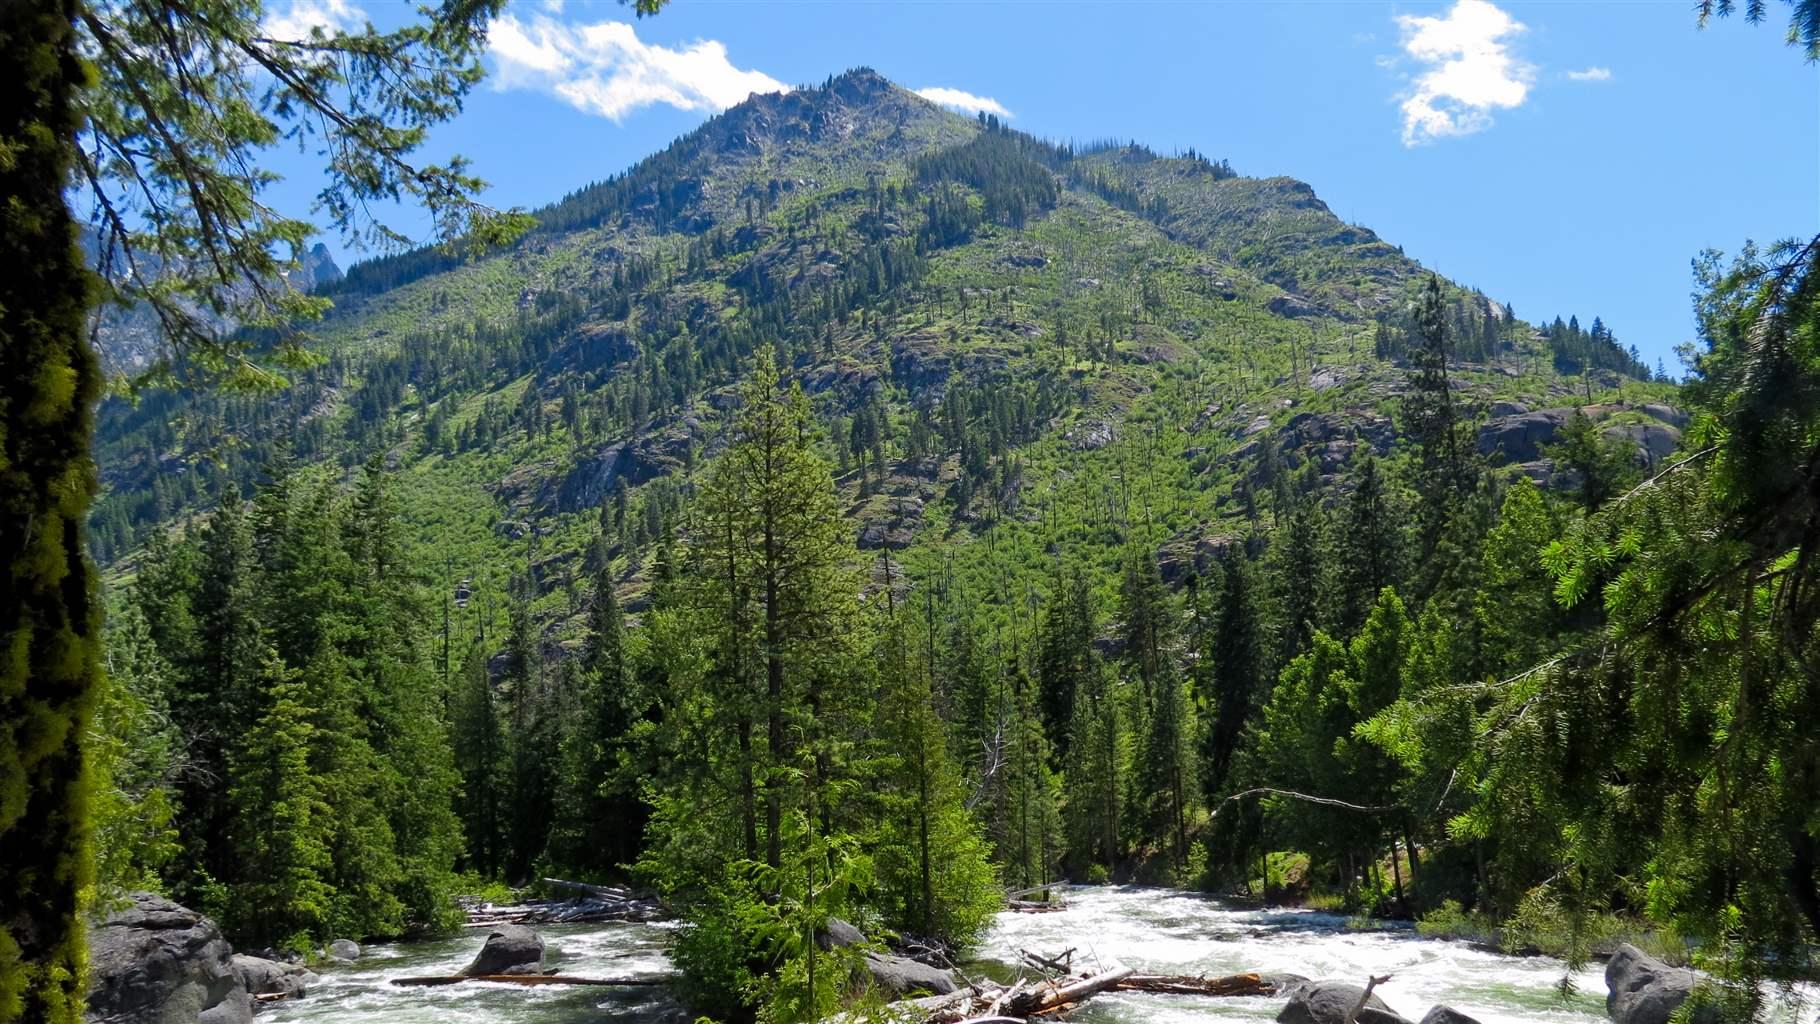 A new study finds that Icicle Creek, which supports a variety of numerous fish species including bulltrout, steelhead, chinook, and cutthroat trout, is one of among several of Washington’s waterways that new research shows merit protection.